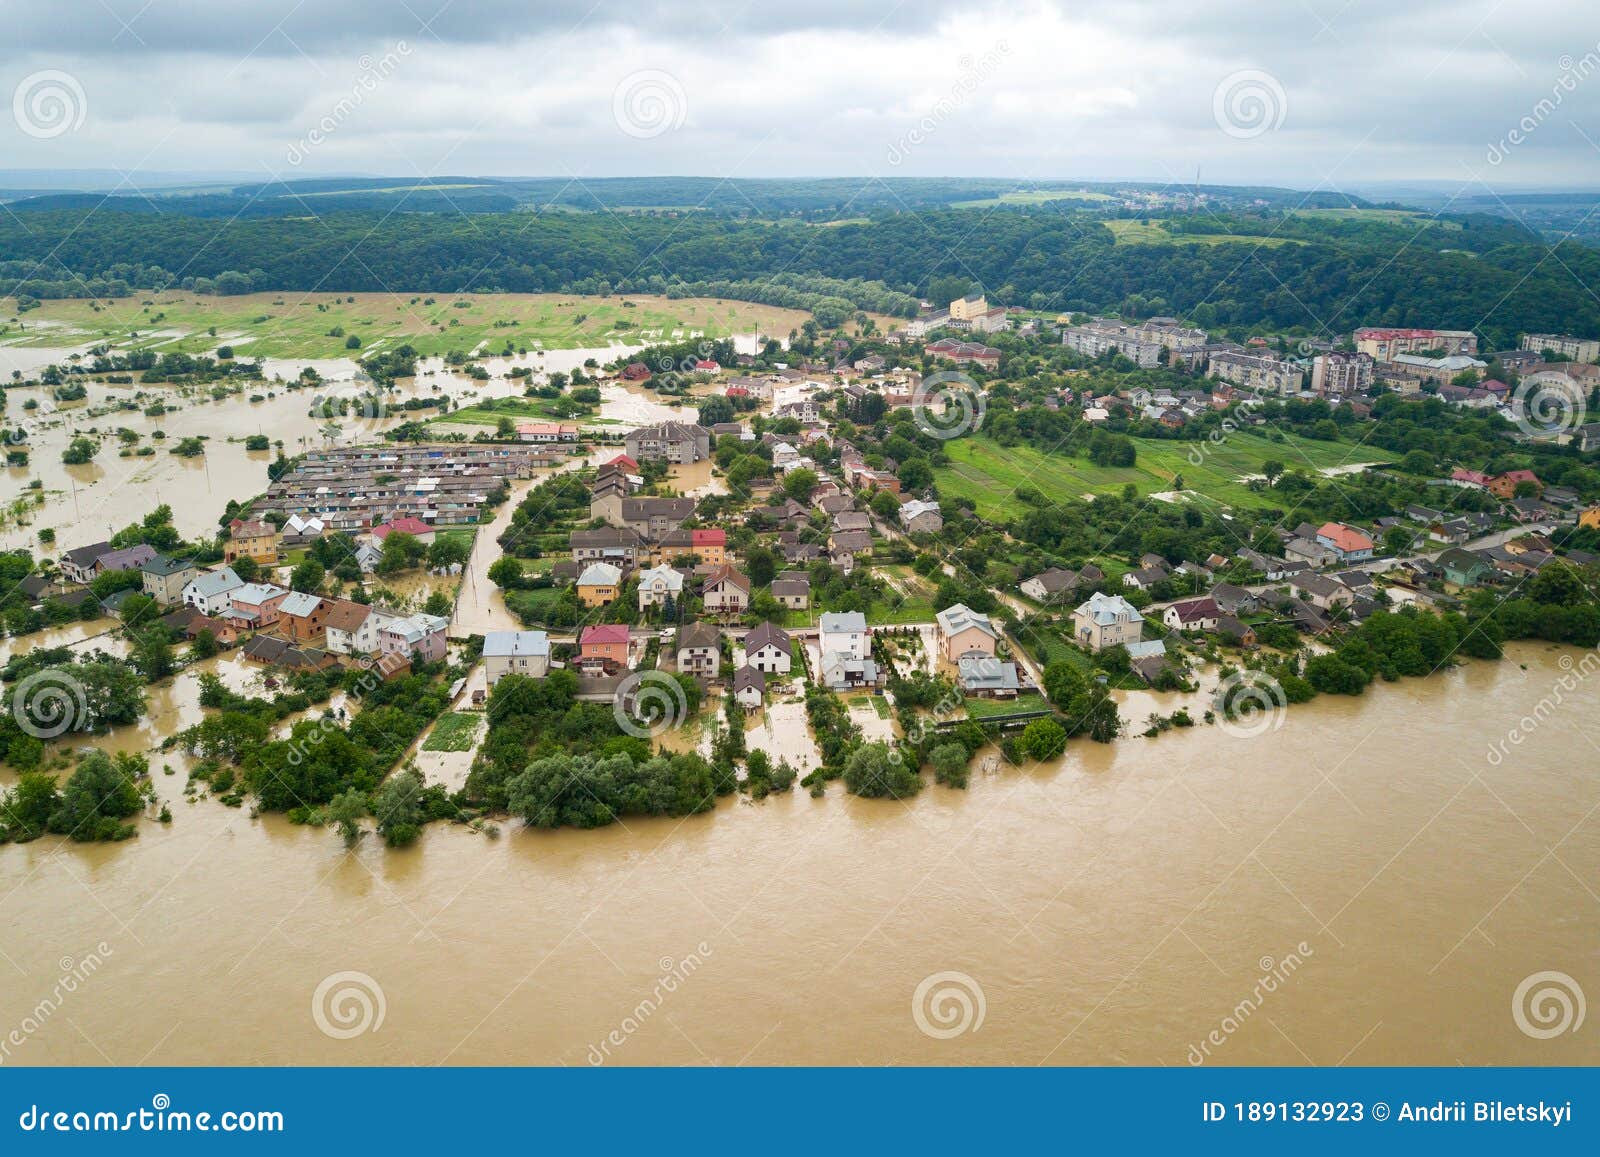 aerial view of flooded houses with dirty water of dnister river in halych town, western ukraine